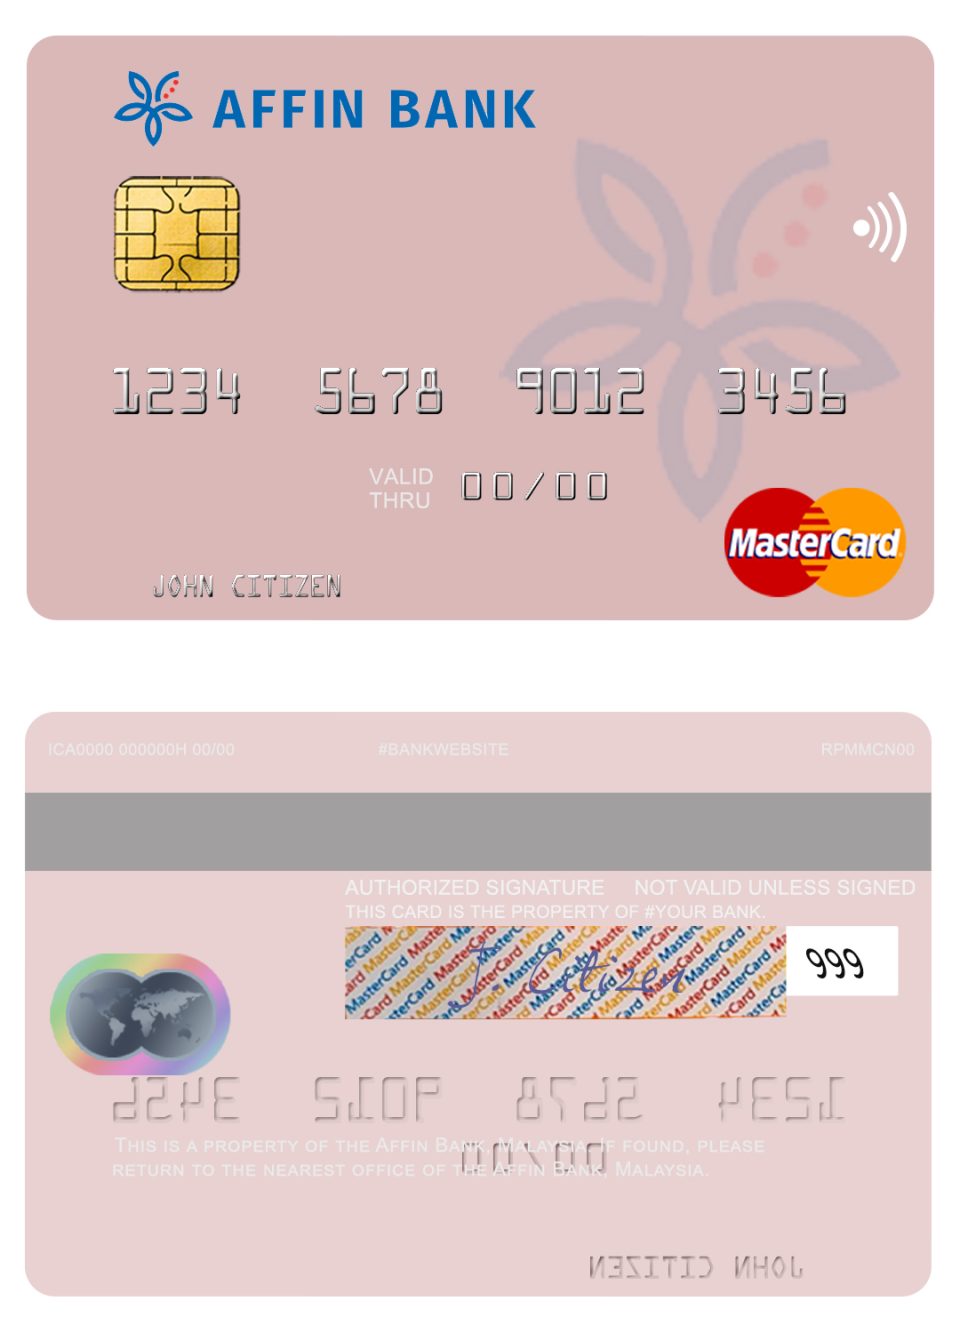 Editable Malaysia Affin bank mastercard credit card Templates in PSD Format